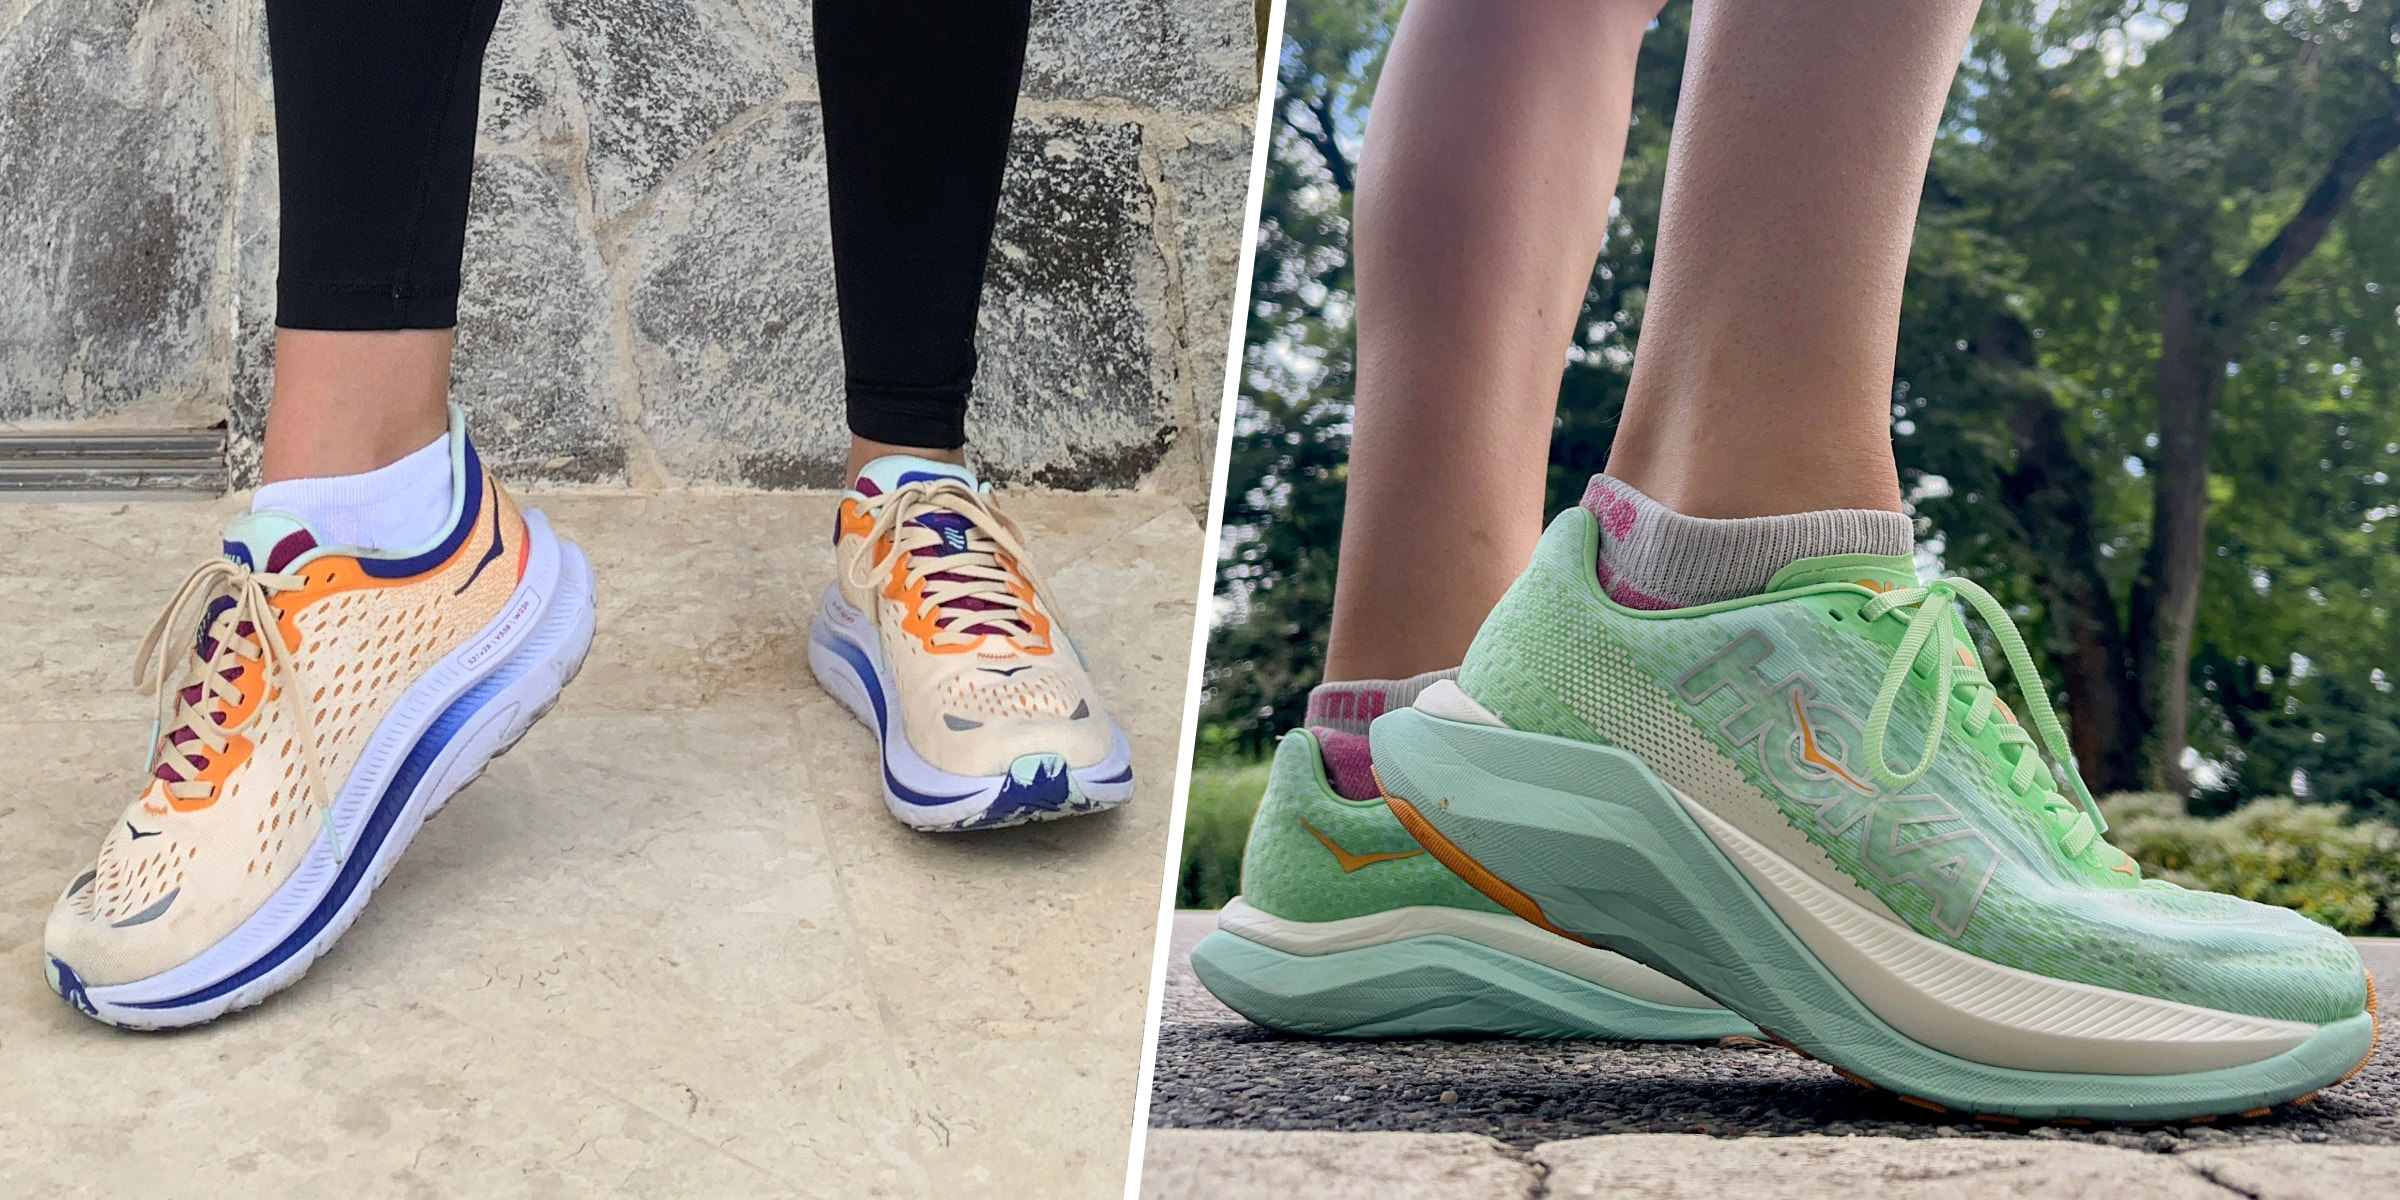 Are Hokas good for your feet? Experts weigh in about the trendy sneakers